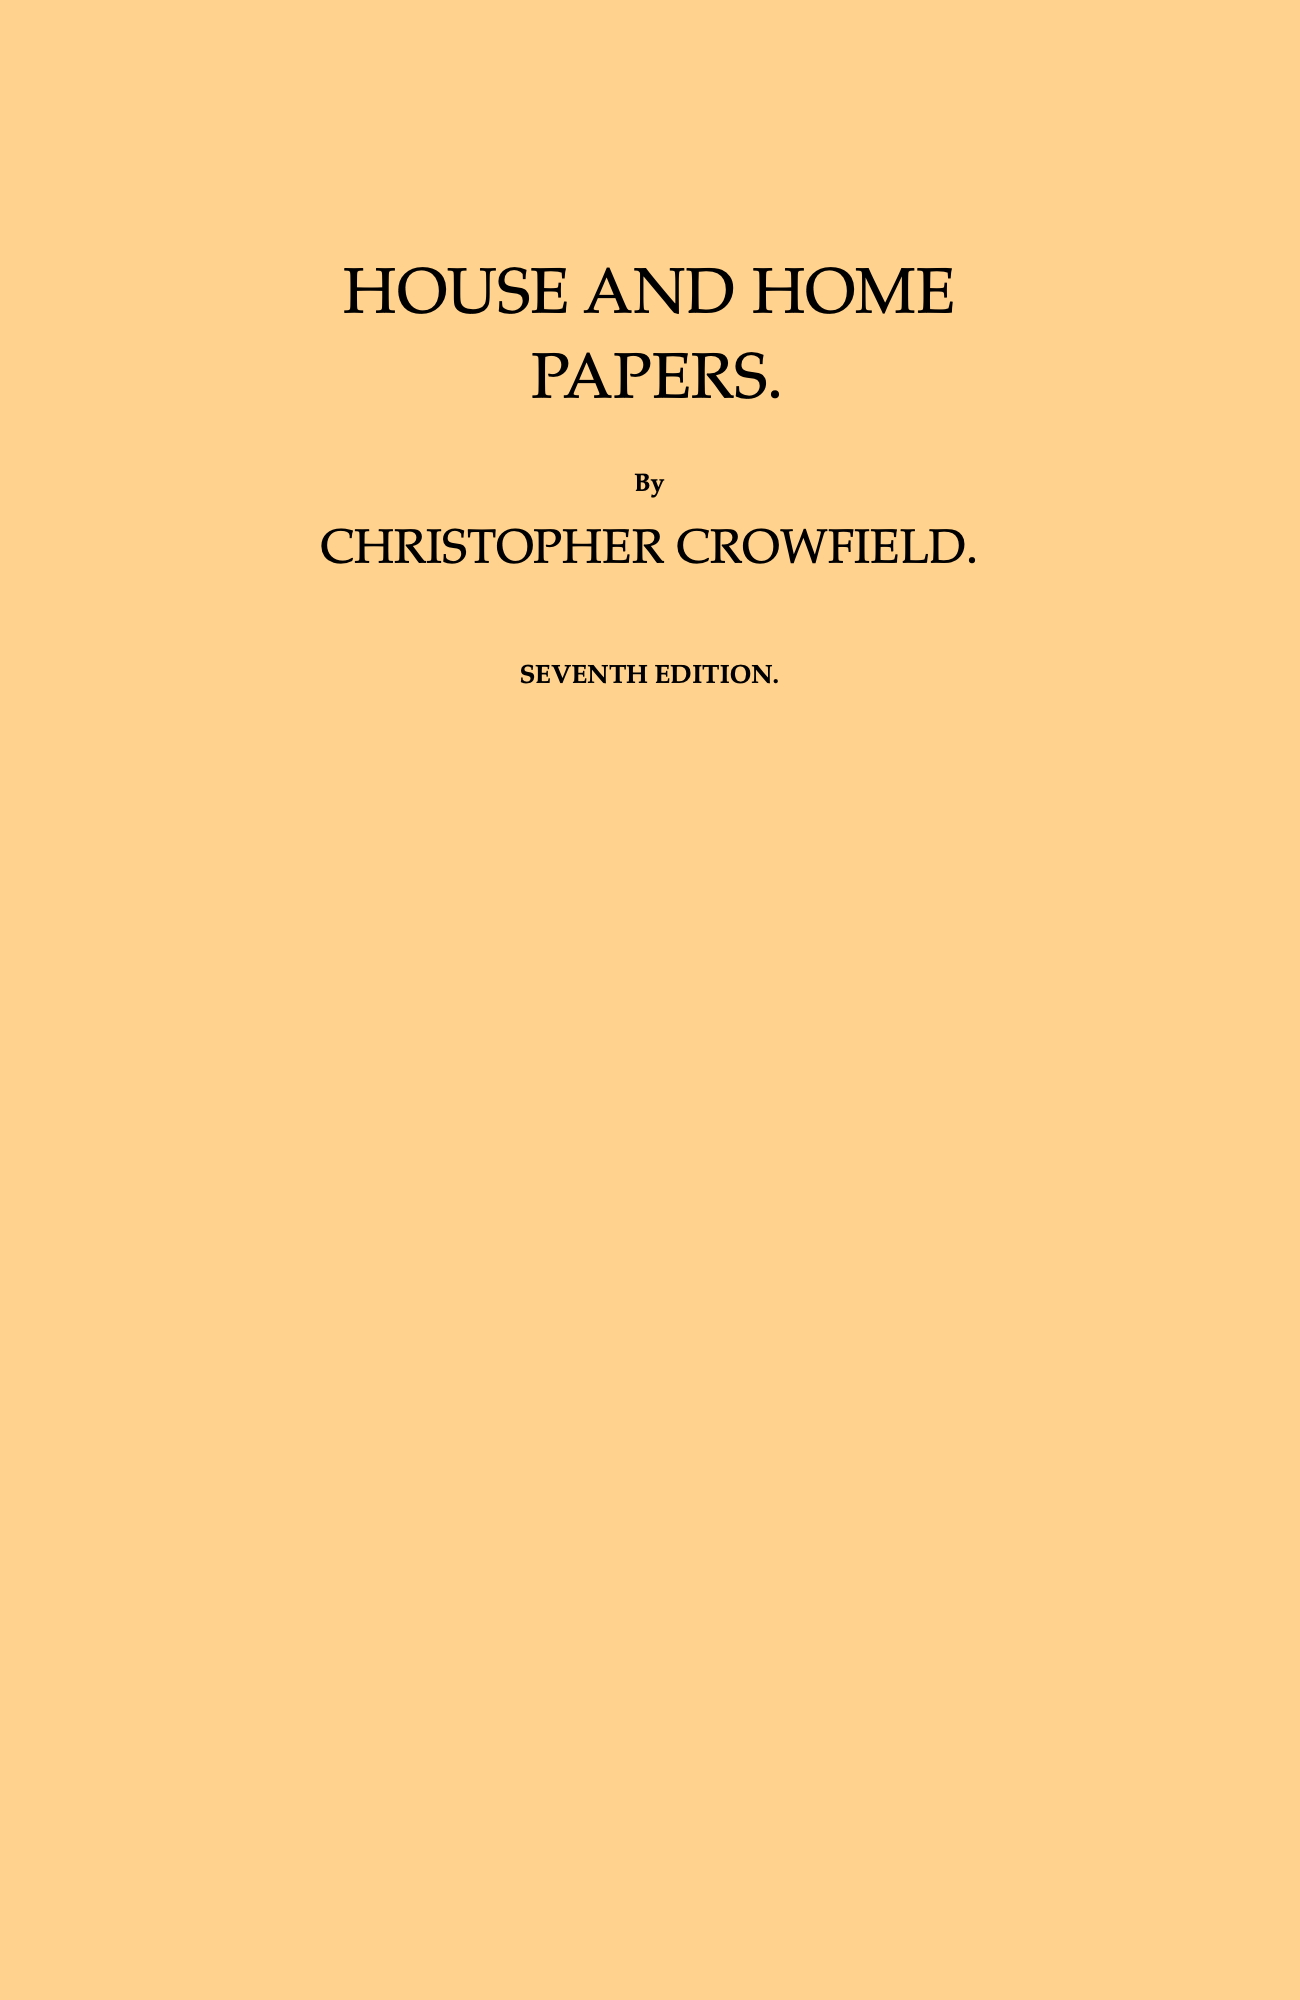 House and Home Papers, by Christopher Crowfield--A Project Gutenberg eBook image image